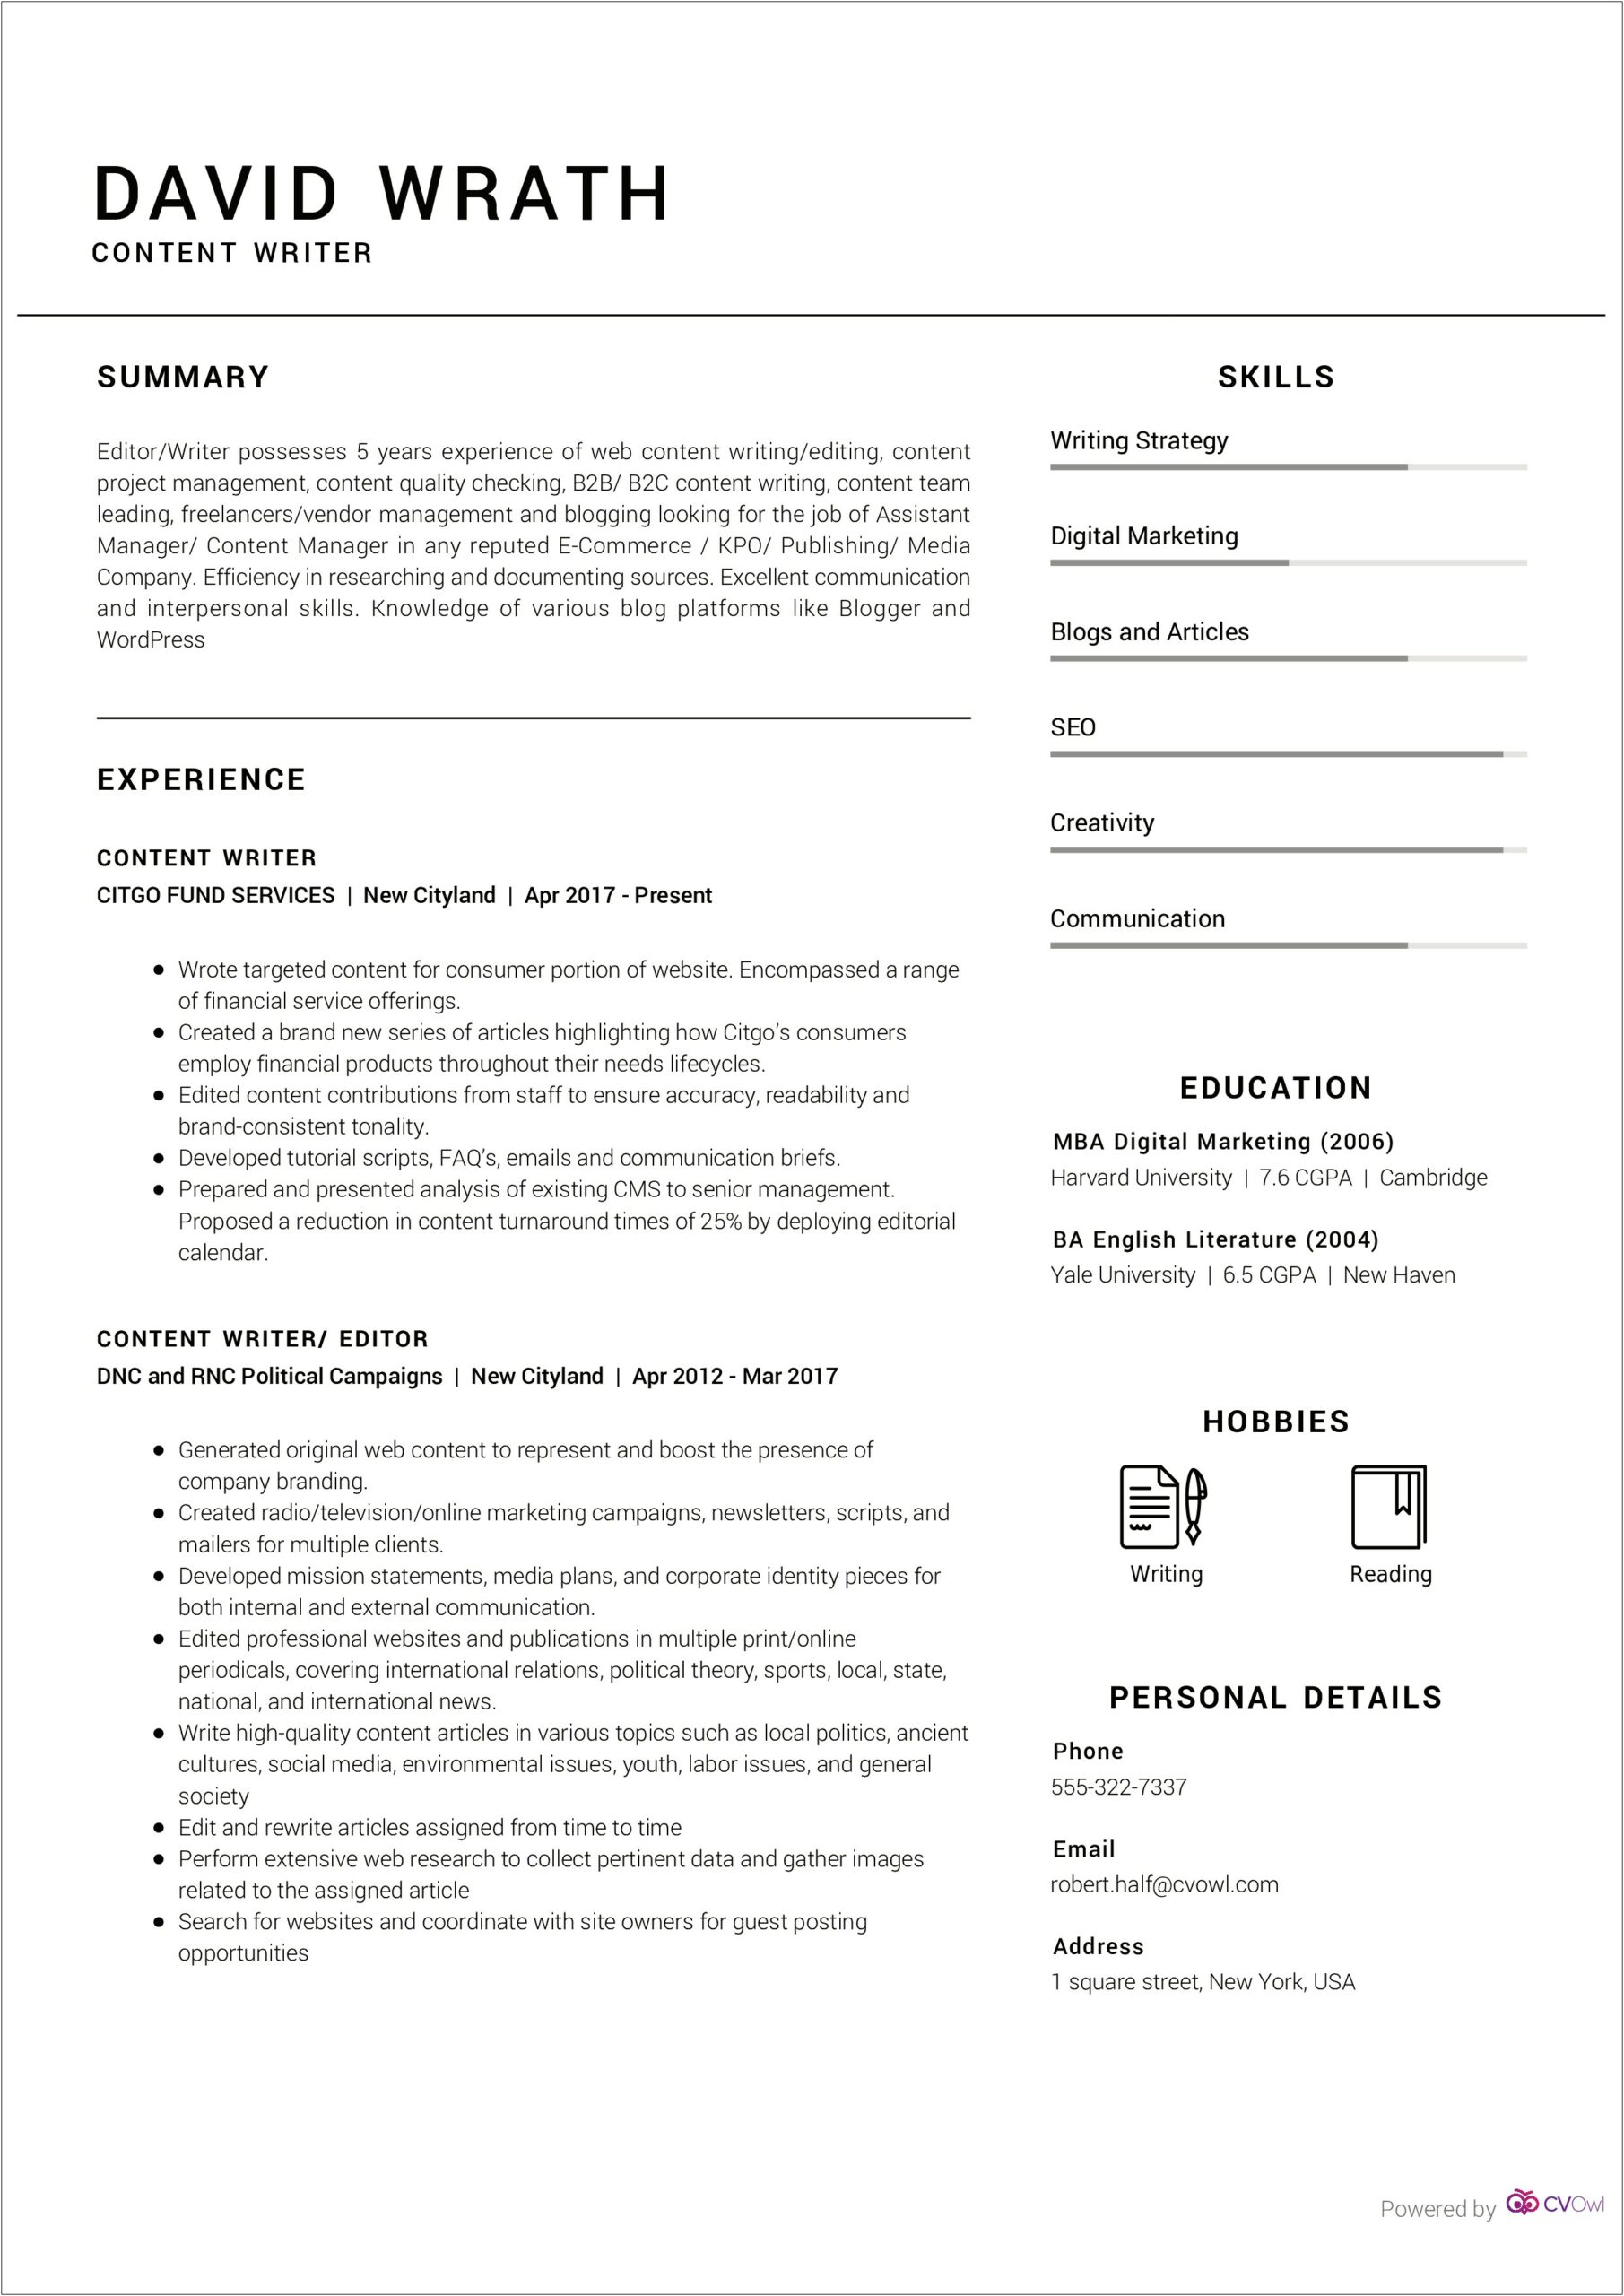 Best Career Objectives To Write In Resume